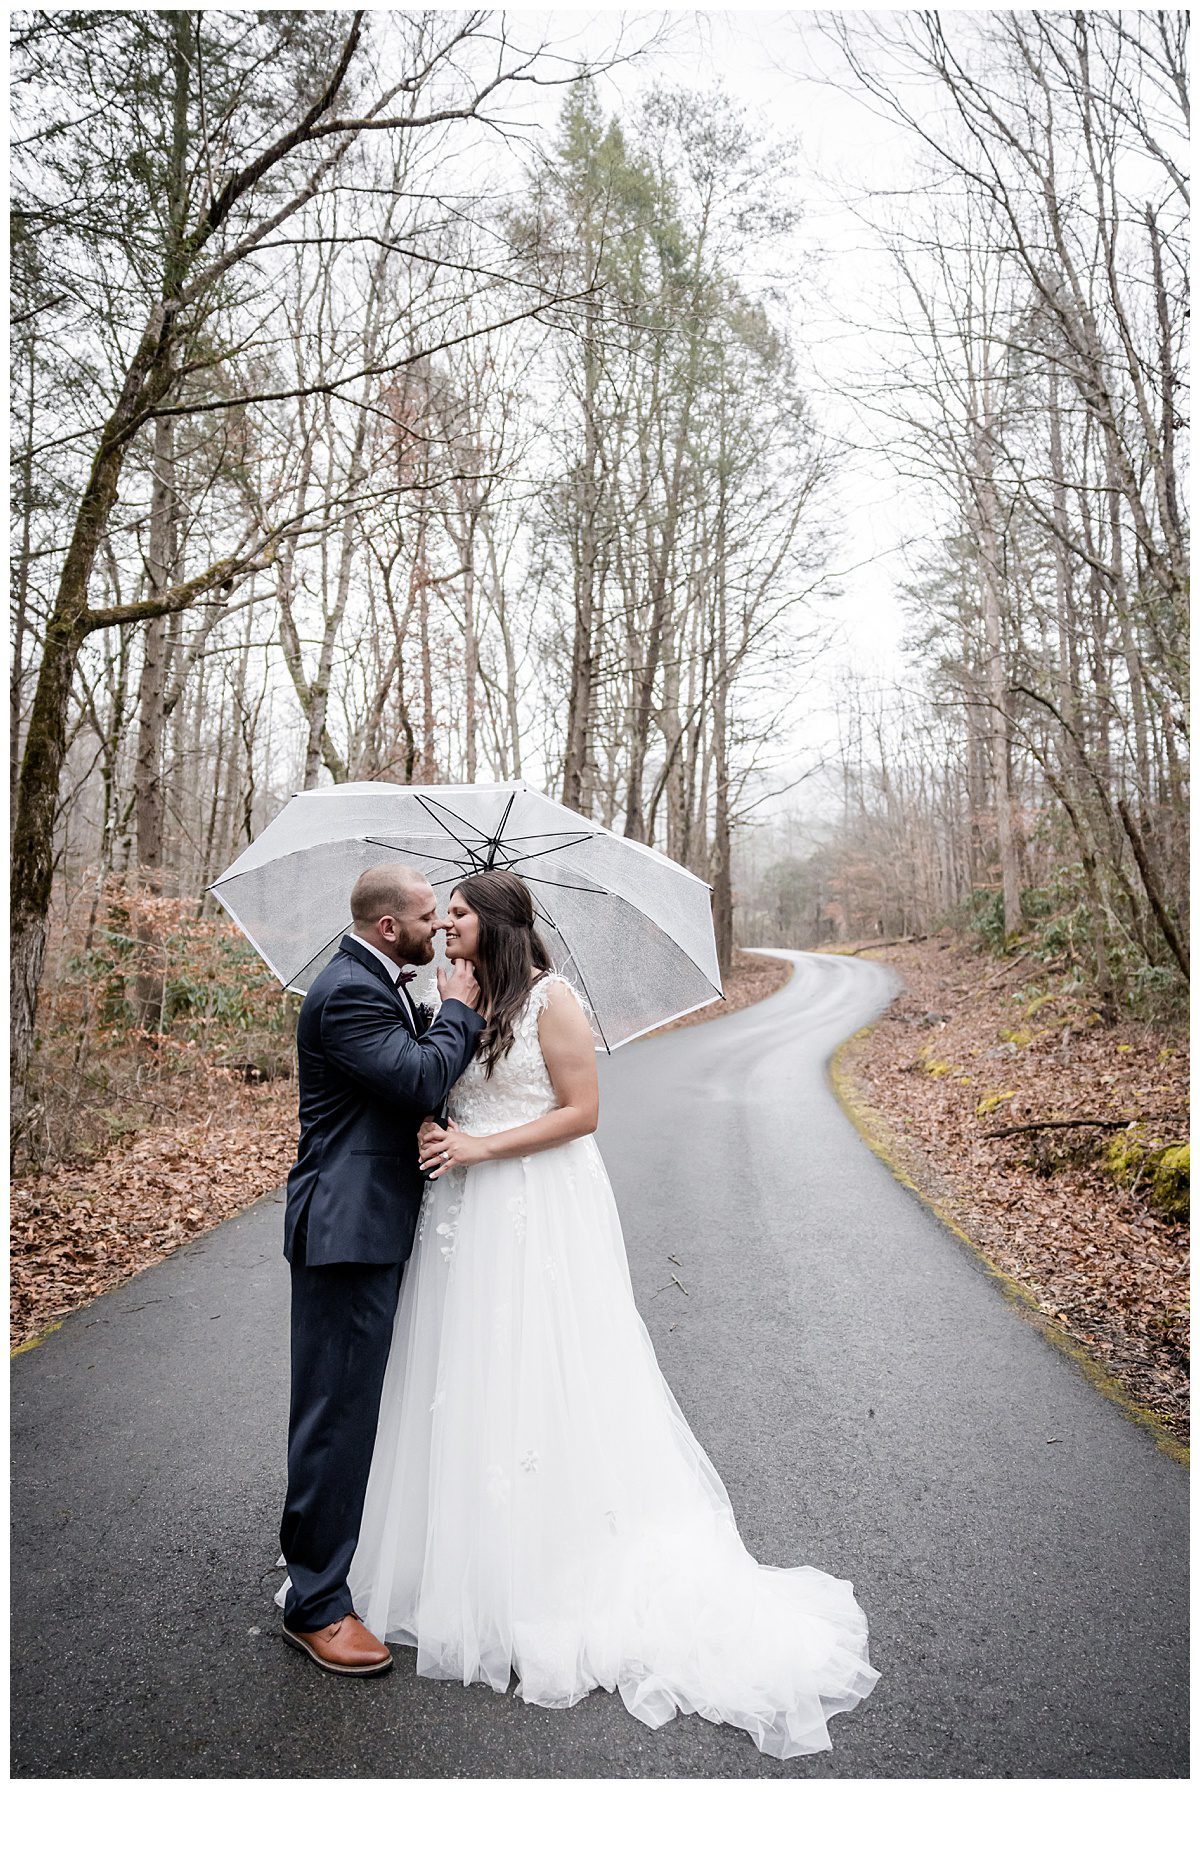 Drizzly December Wedding